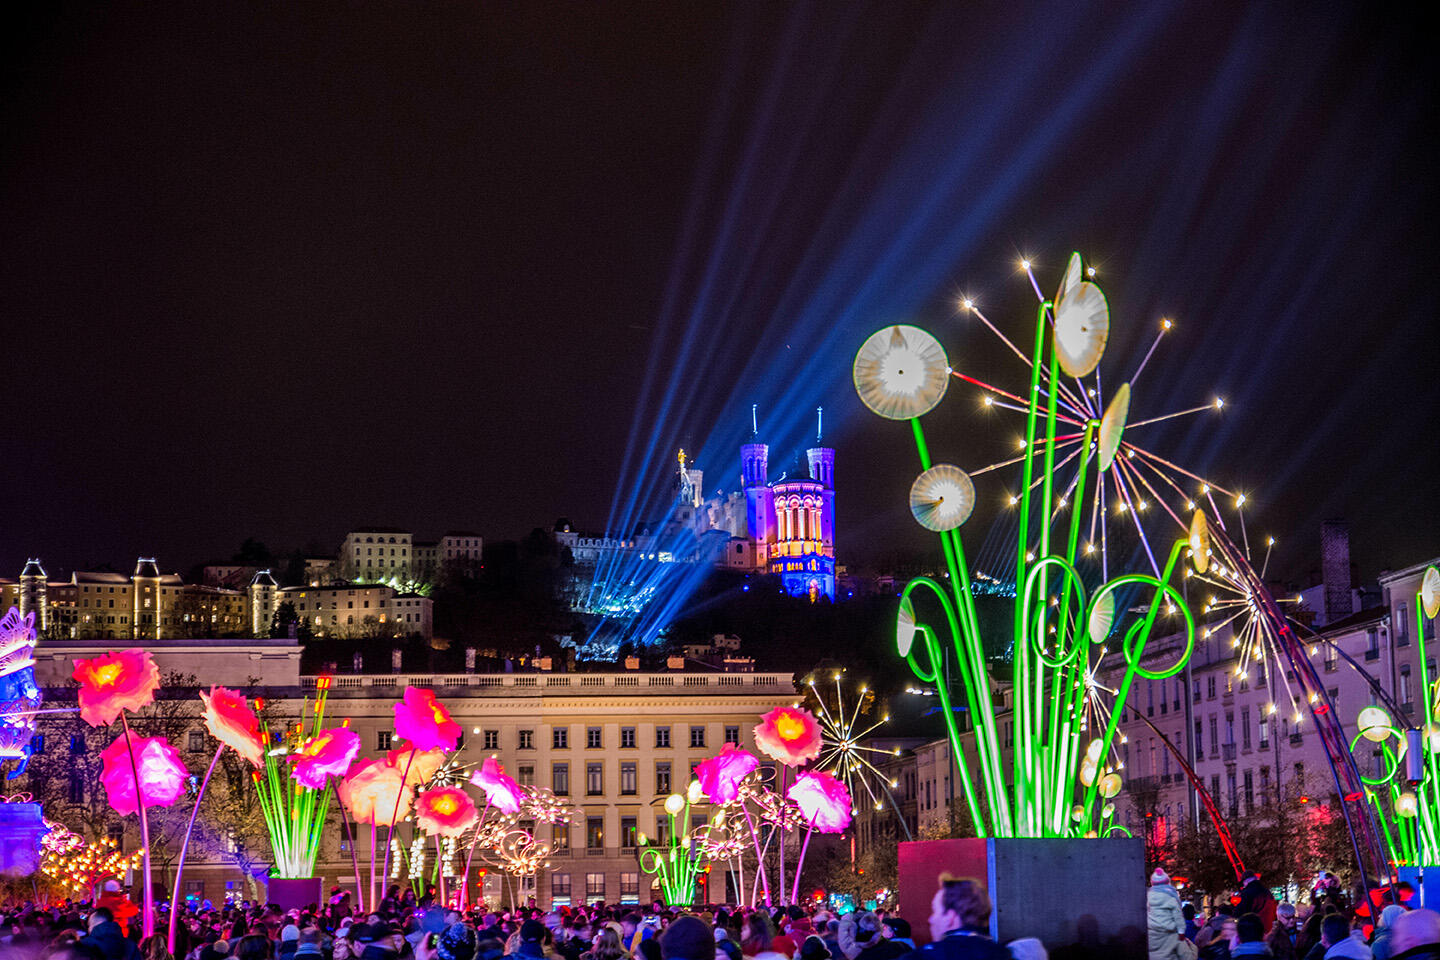 View of the Festival of Lights in Lyon with illuminated basilica and colorful floral installations, stay at Appart’City.